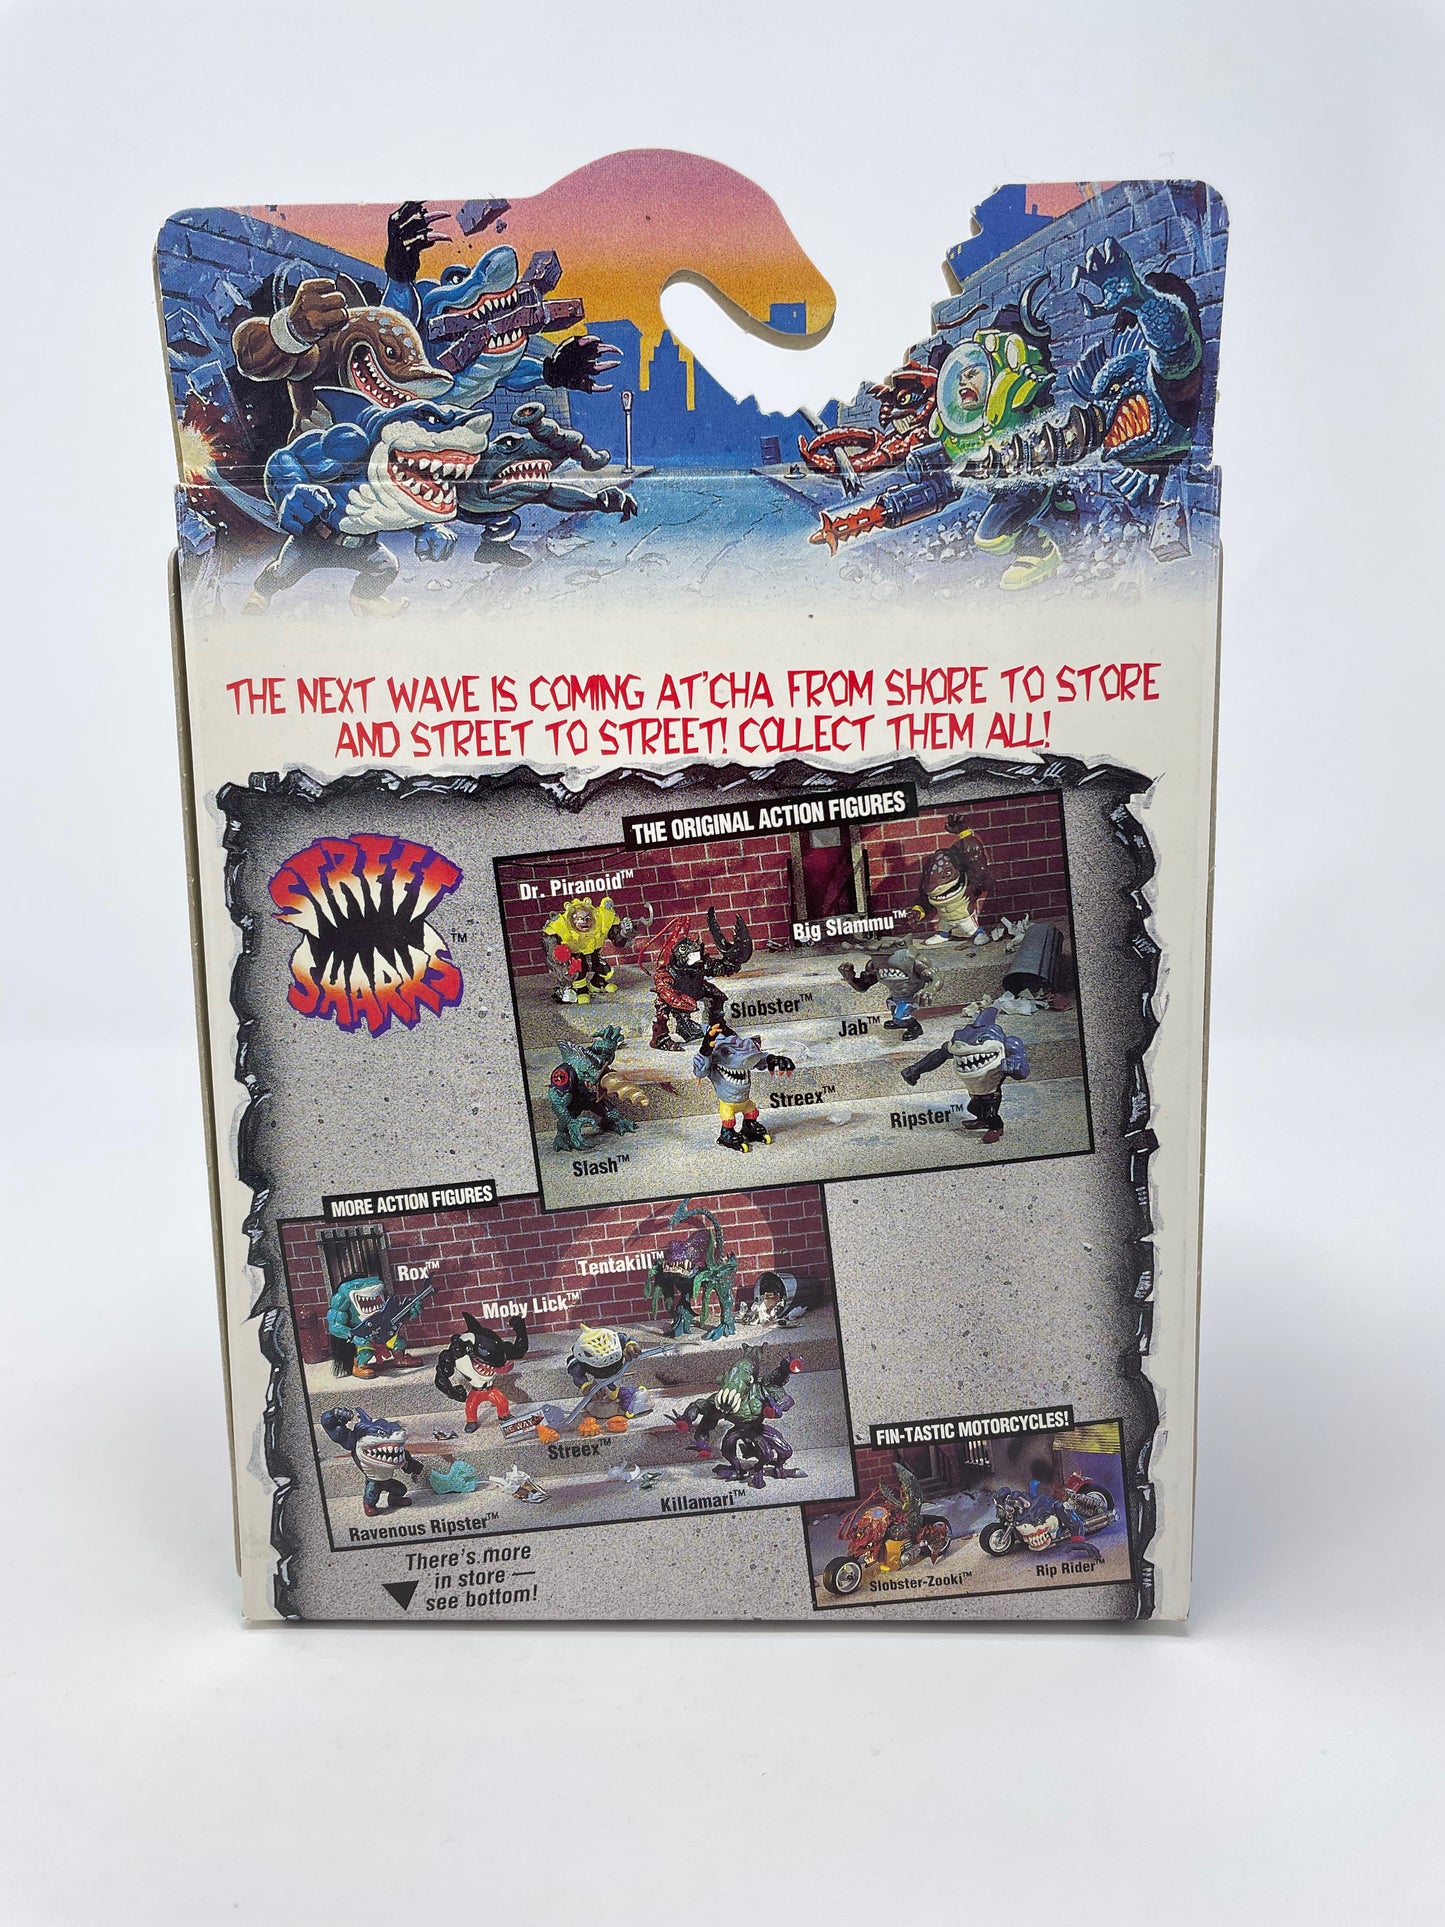 Ravenous Ripster - Street Sharks Wave II (2 of 4)